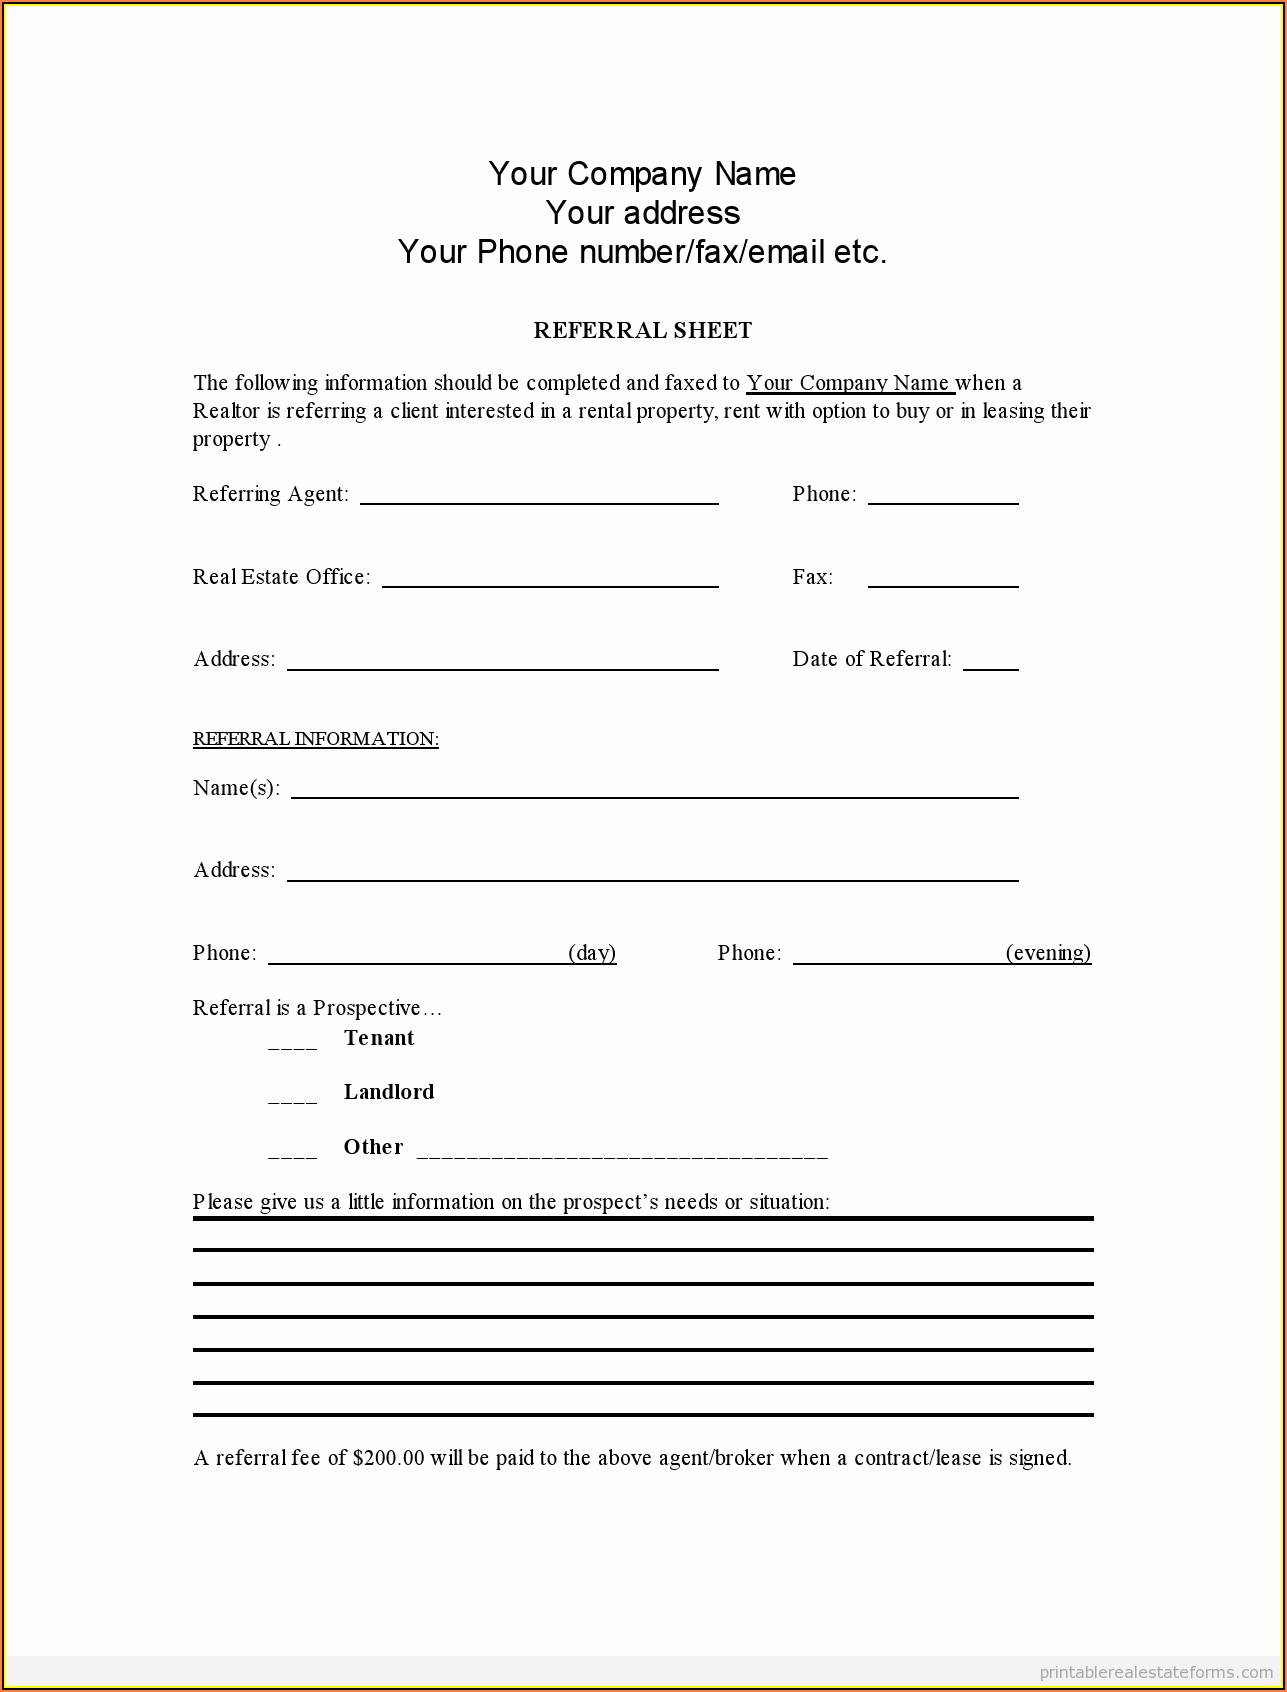 How To Fill Out A Real Estate Agent Referral Form